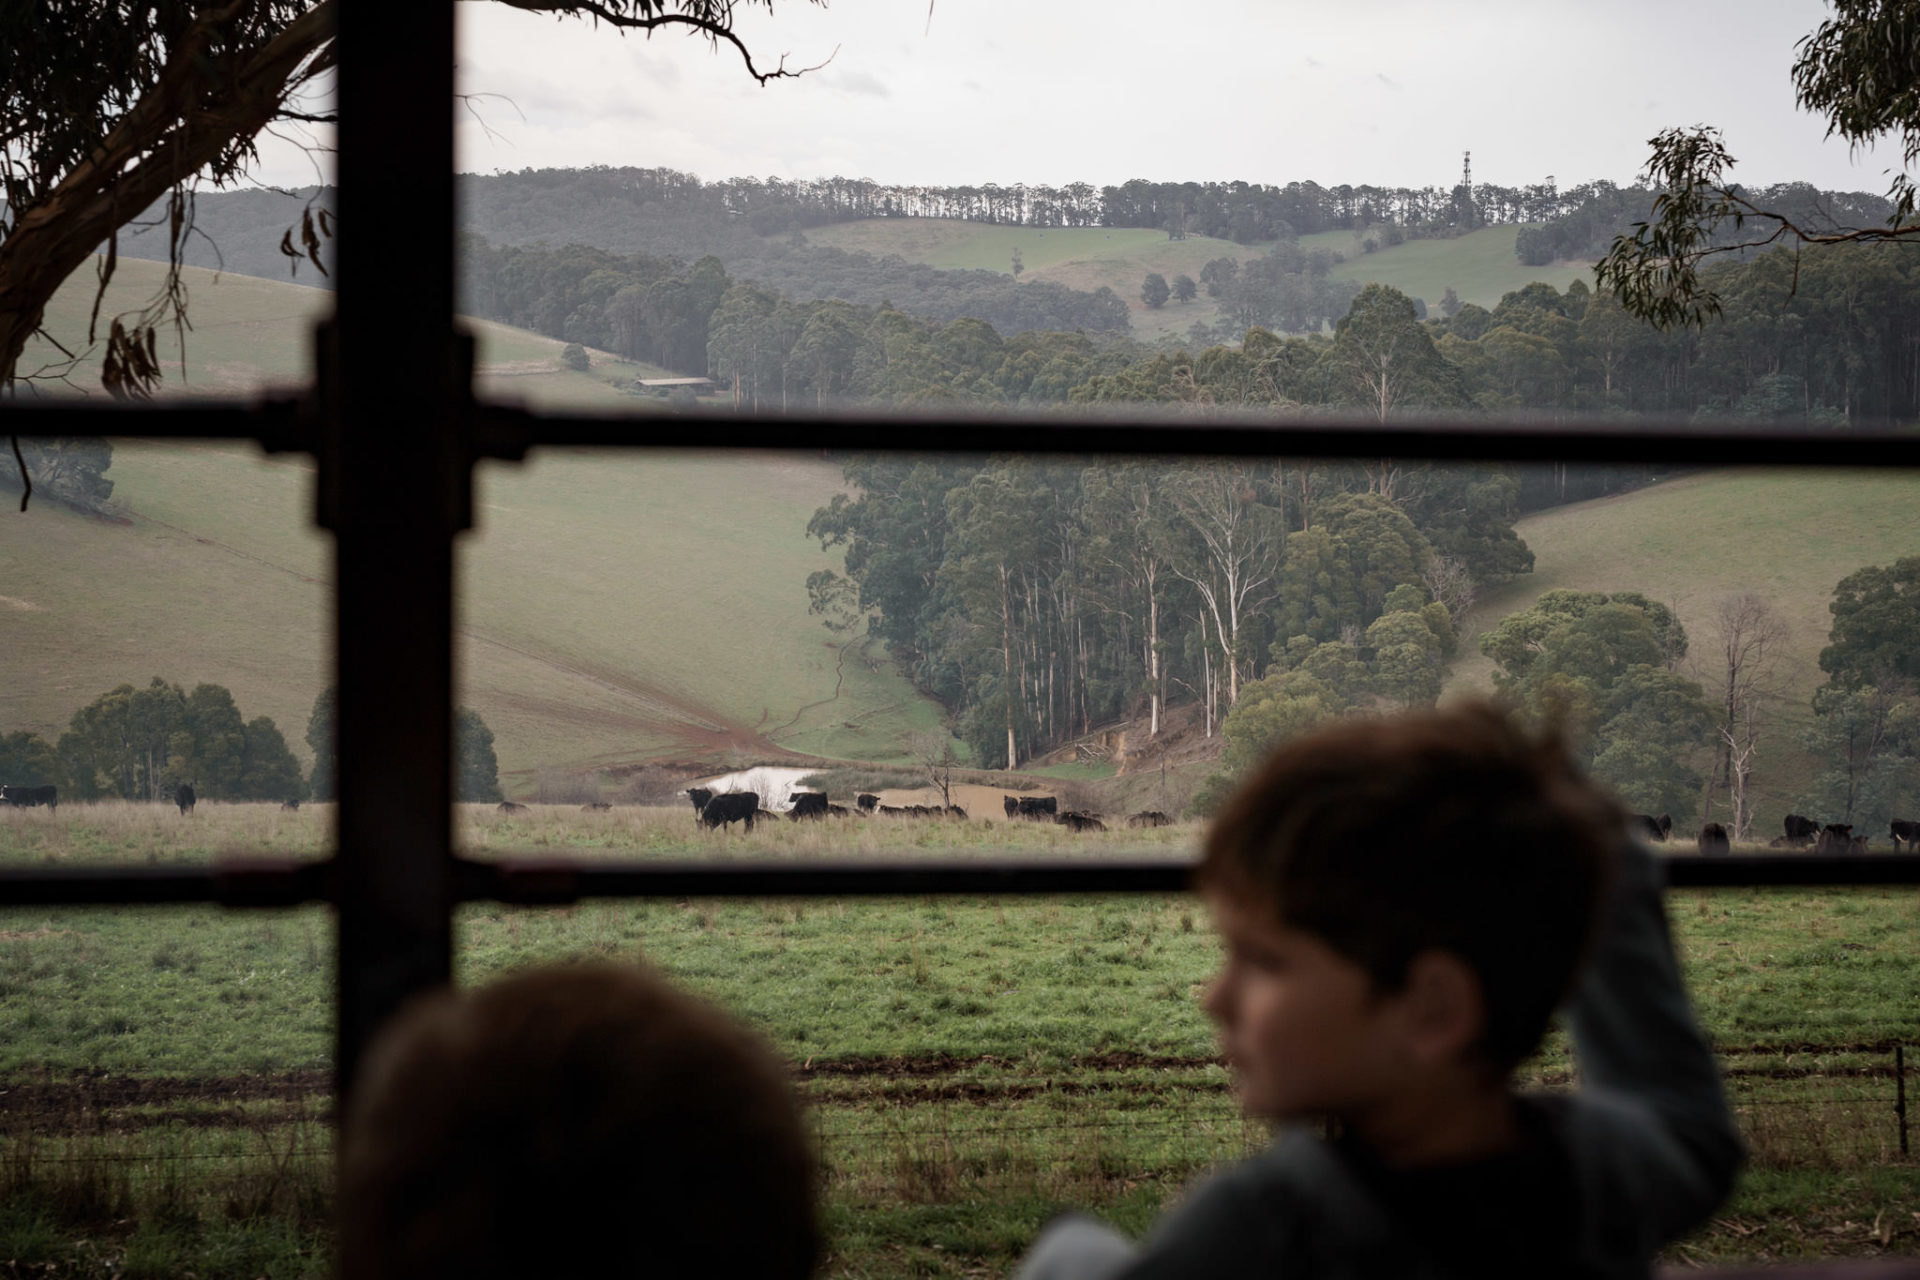 Gembrook views from inside the Puffing Billy carraige. Rolling farmlands and animals can be seen outside.